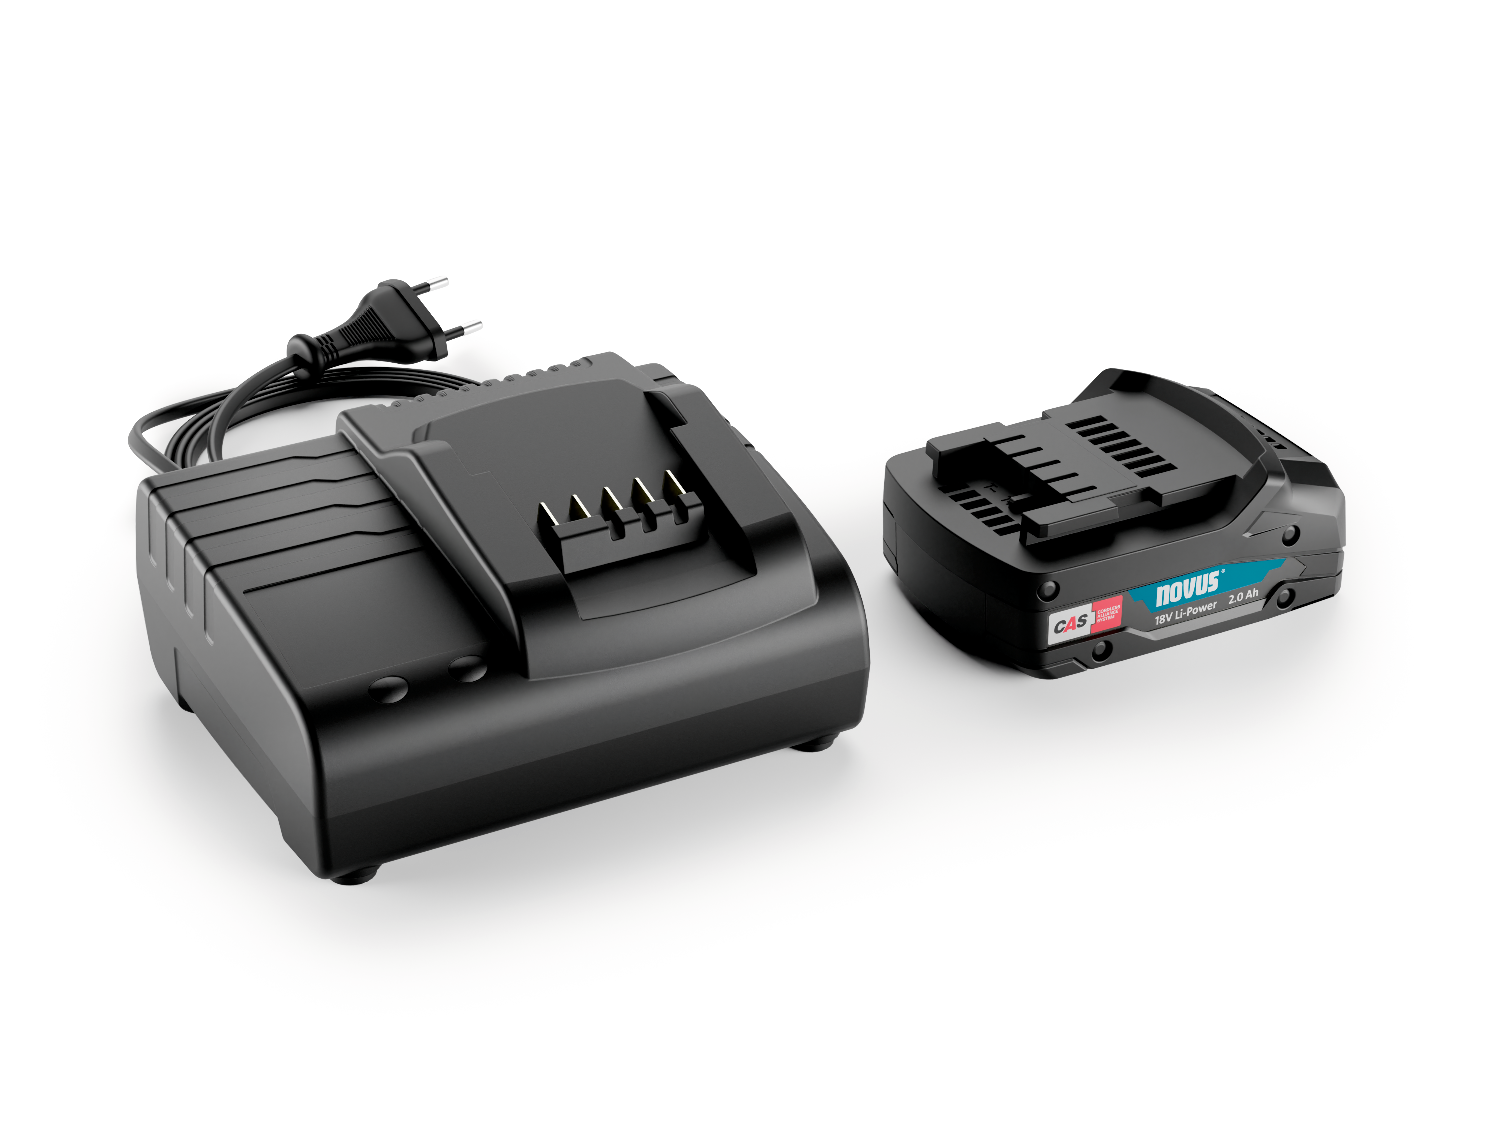 Charger and powerful Cordless Alliance System 18V Li-ion battery, compatible with all professional rechargeable battery products from other CAS partners.